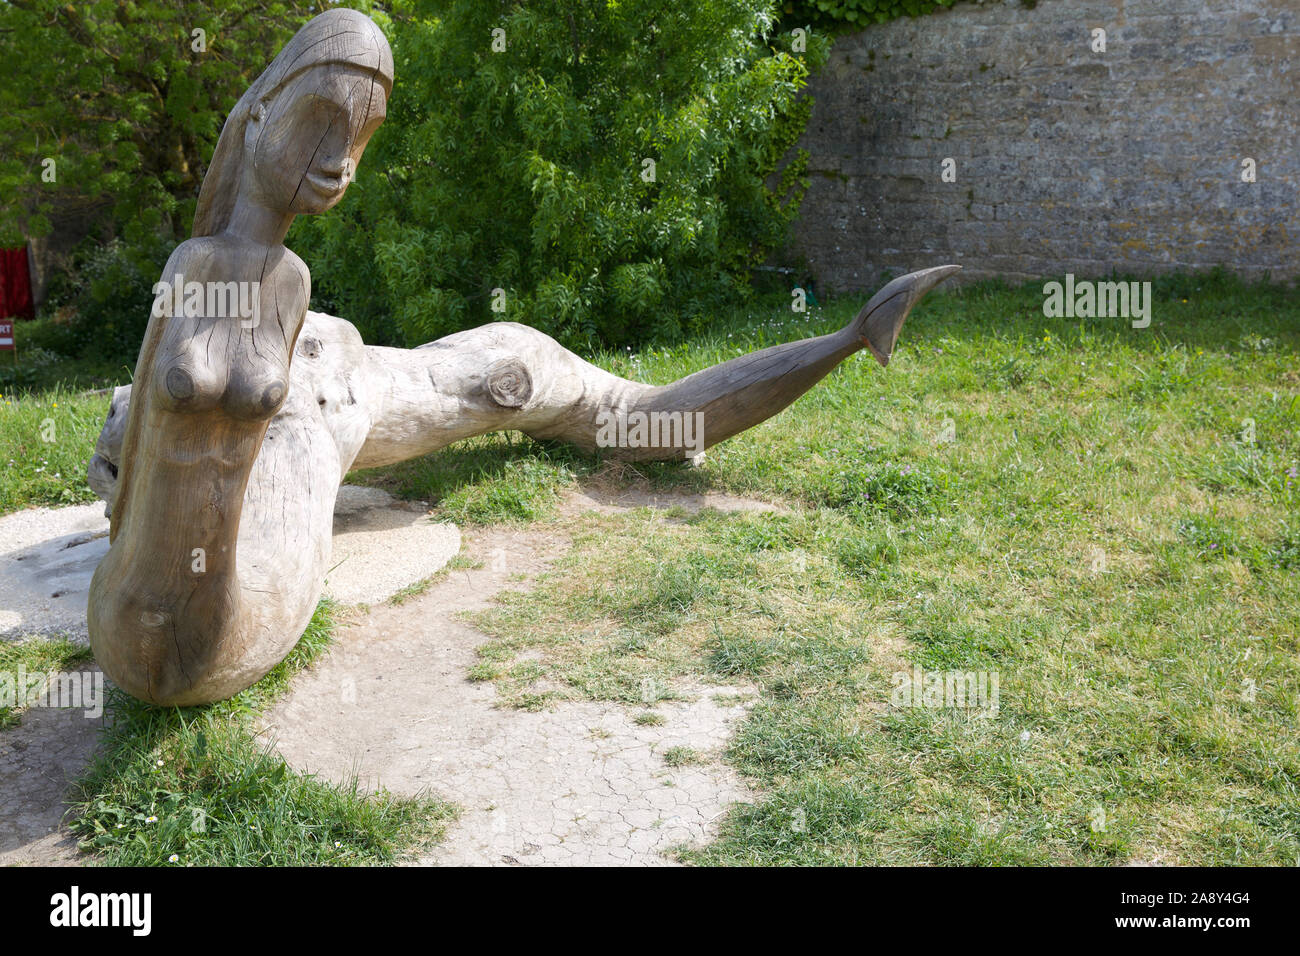 Carved wooden sculpture of a mermaid, Ile d'oleron, Charente Maritime, France Stock Photo